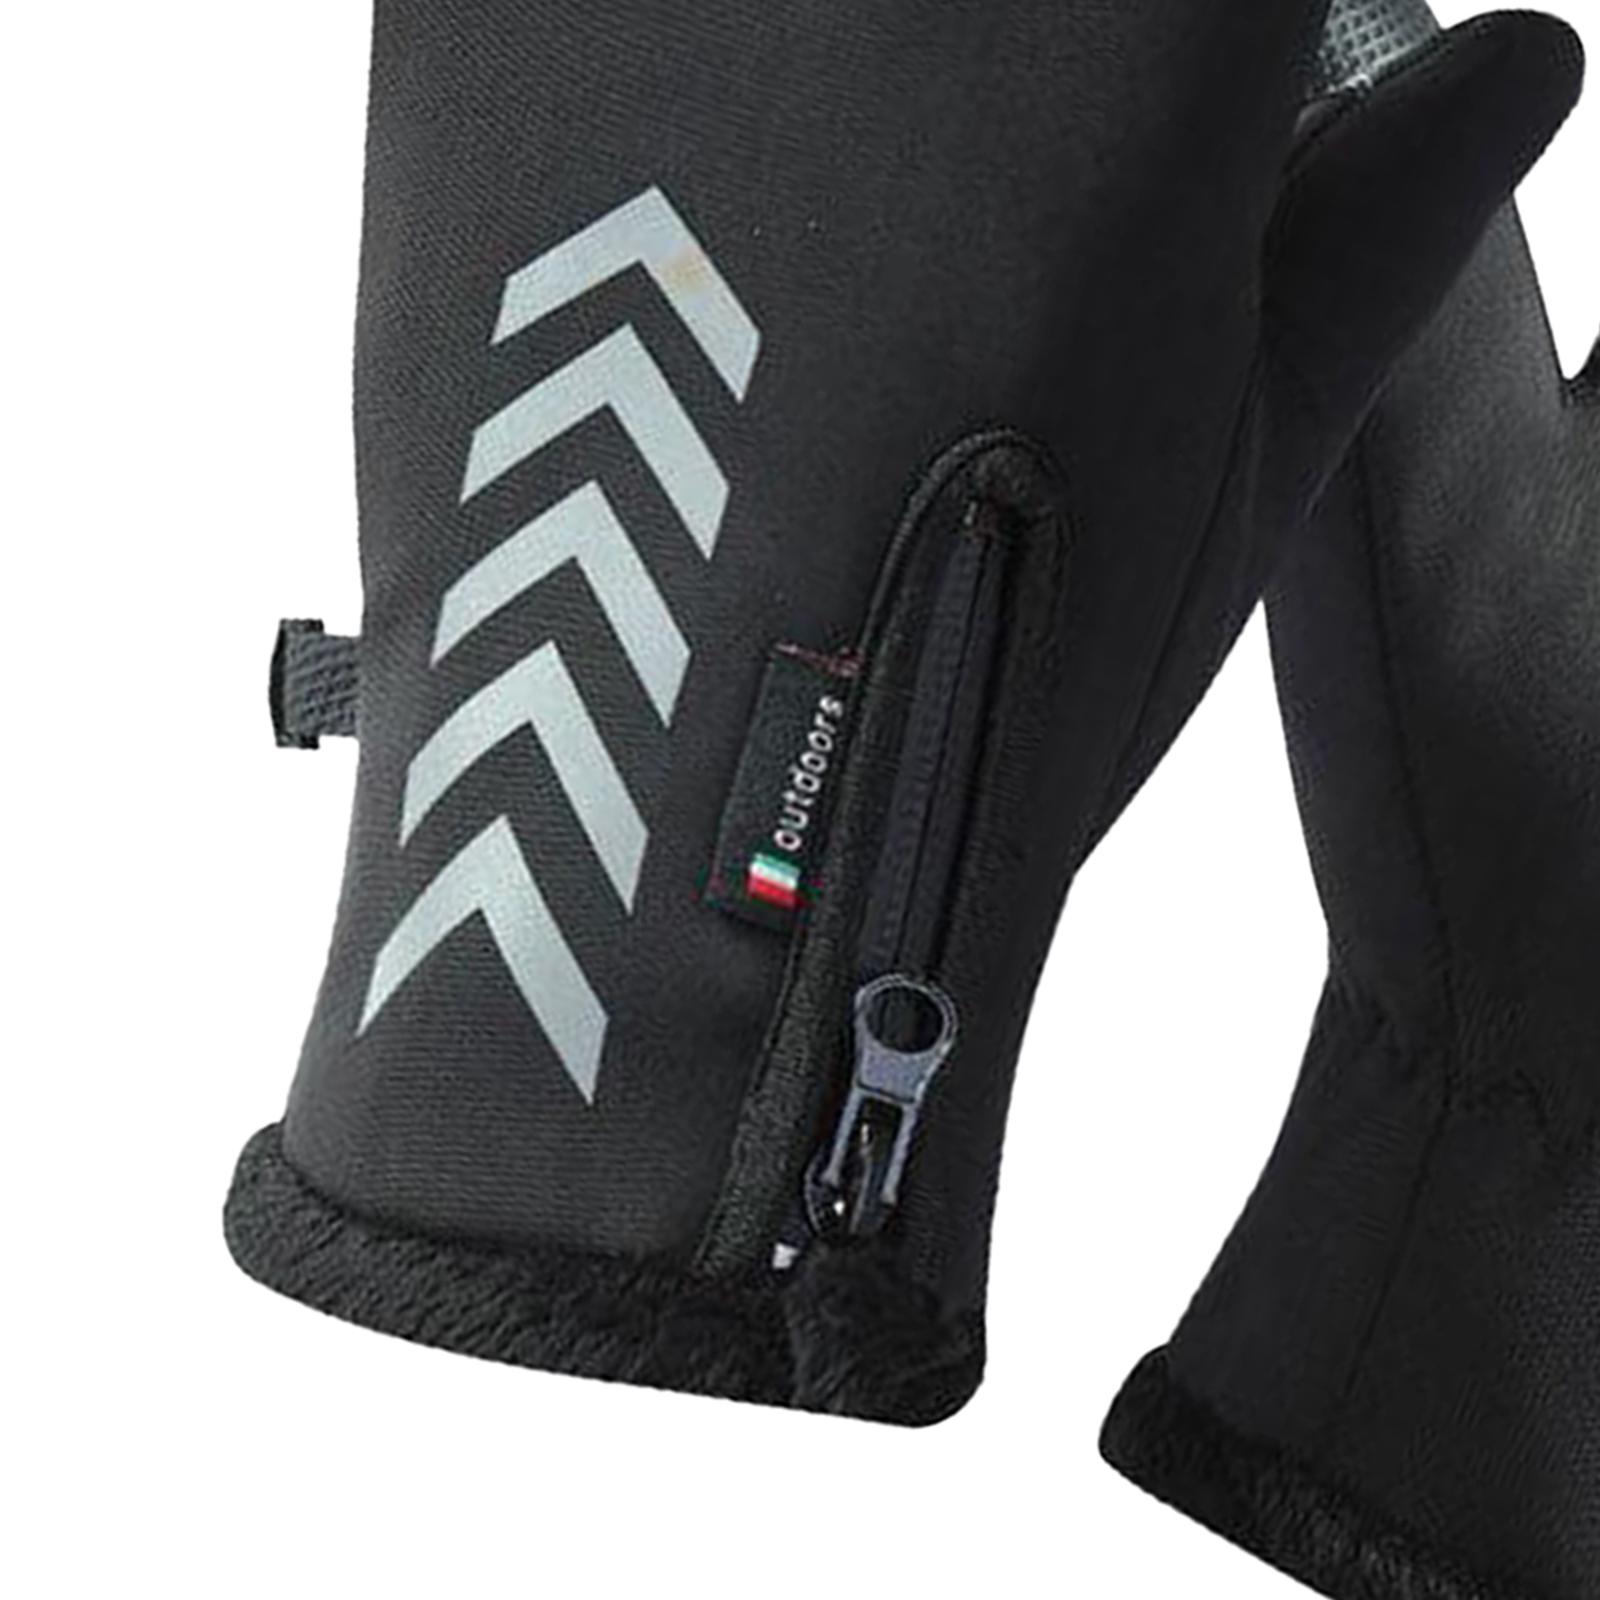 Winter Outdoor Cycling Hiking Sports Gloves Touch Screen XL Black K112